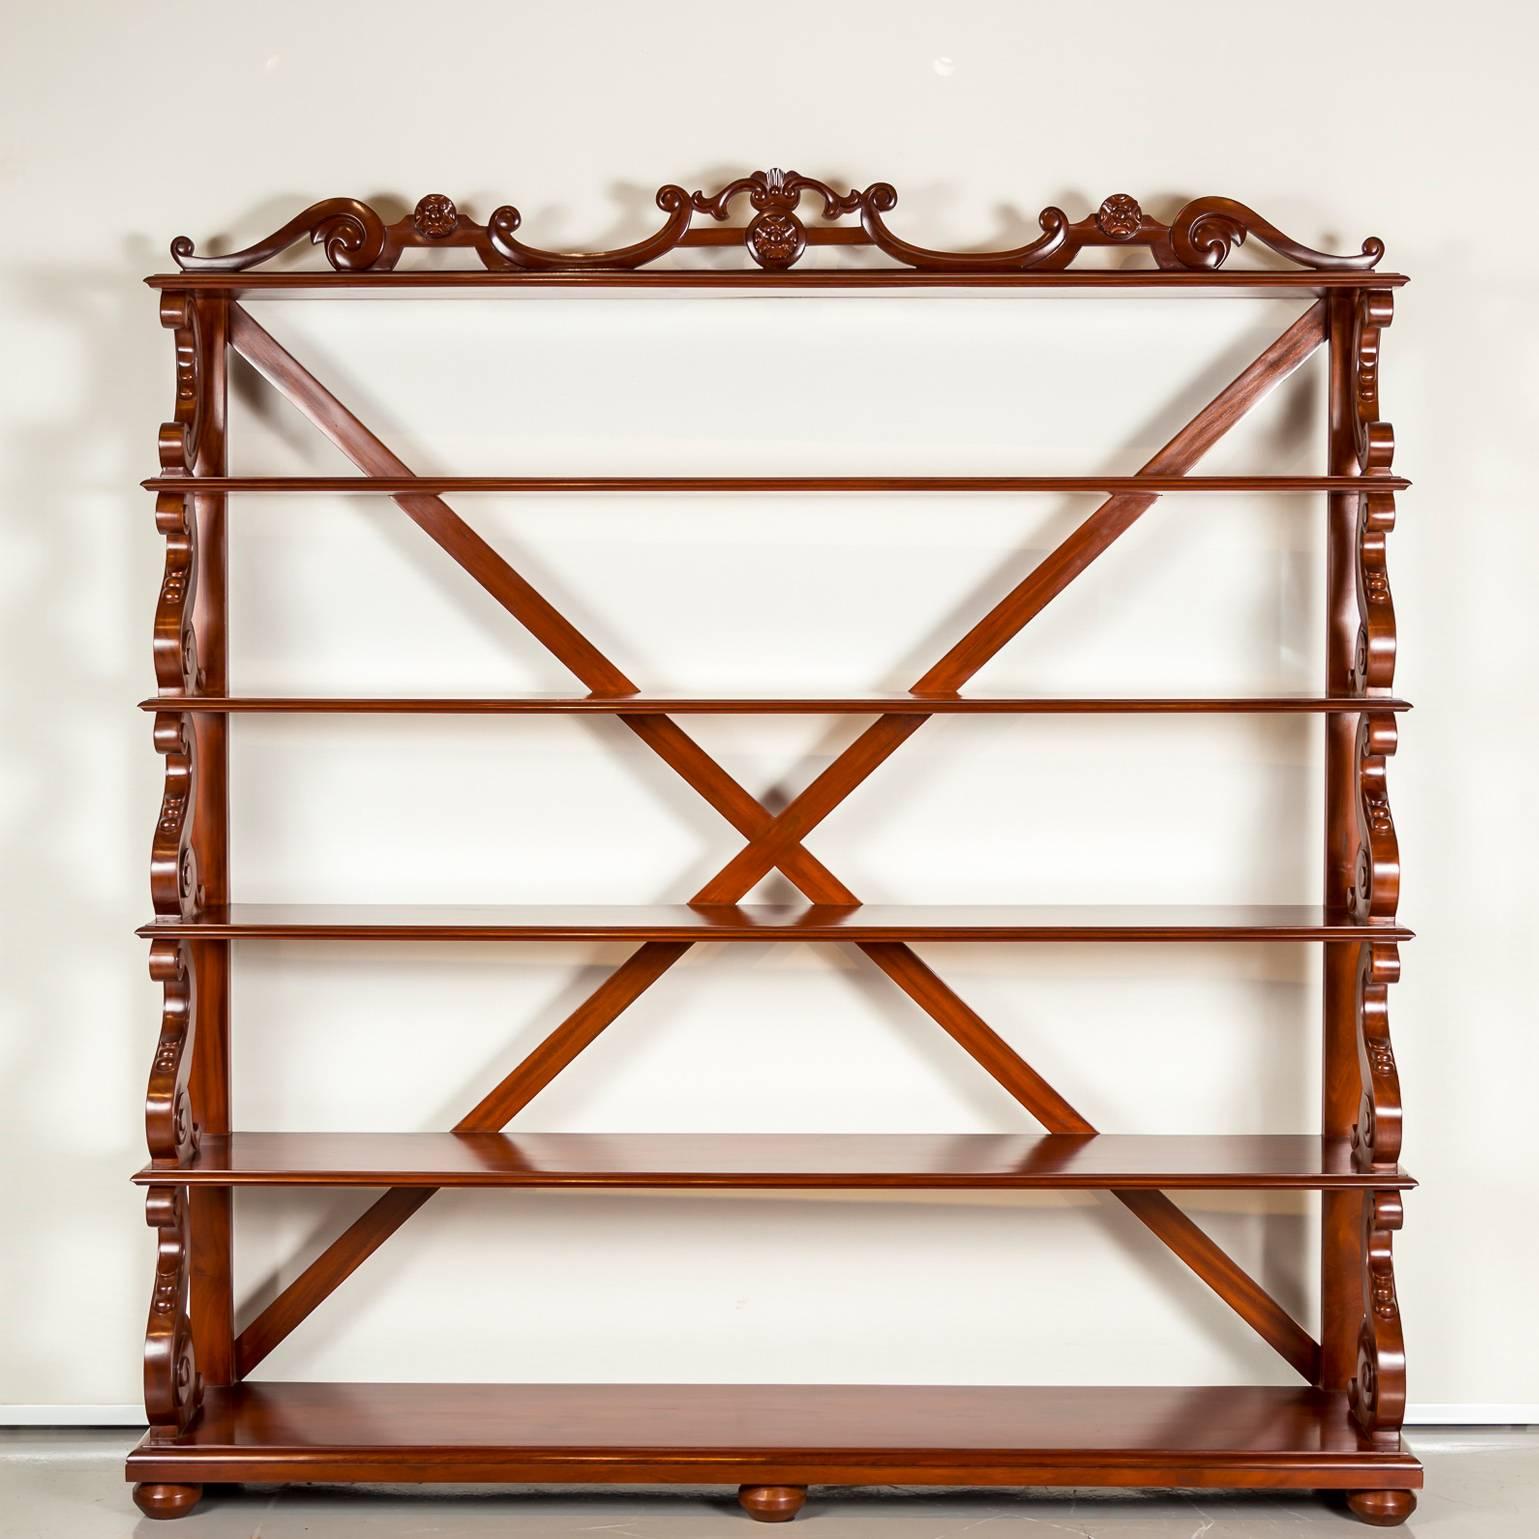 A large British Colonial ‘waterfall’ open bookcase in mahogany with six graduated shelves. The shelves are supported and connected by solid S-shaped stretchers. 
The top shelf decorated with a nicely carved gallery. The bookcase is further